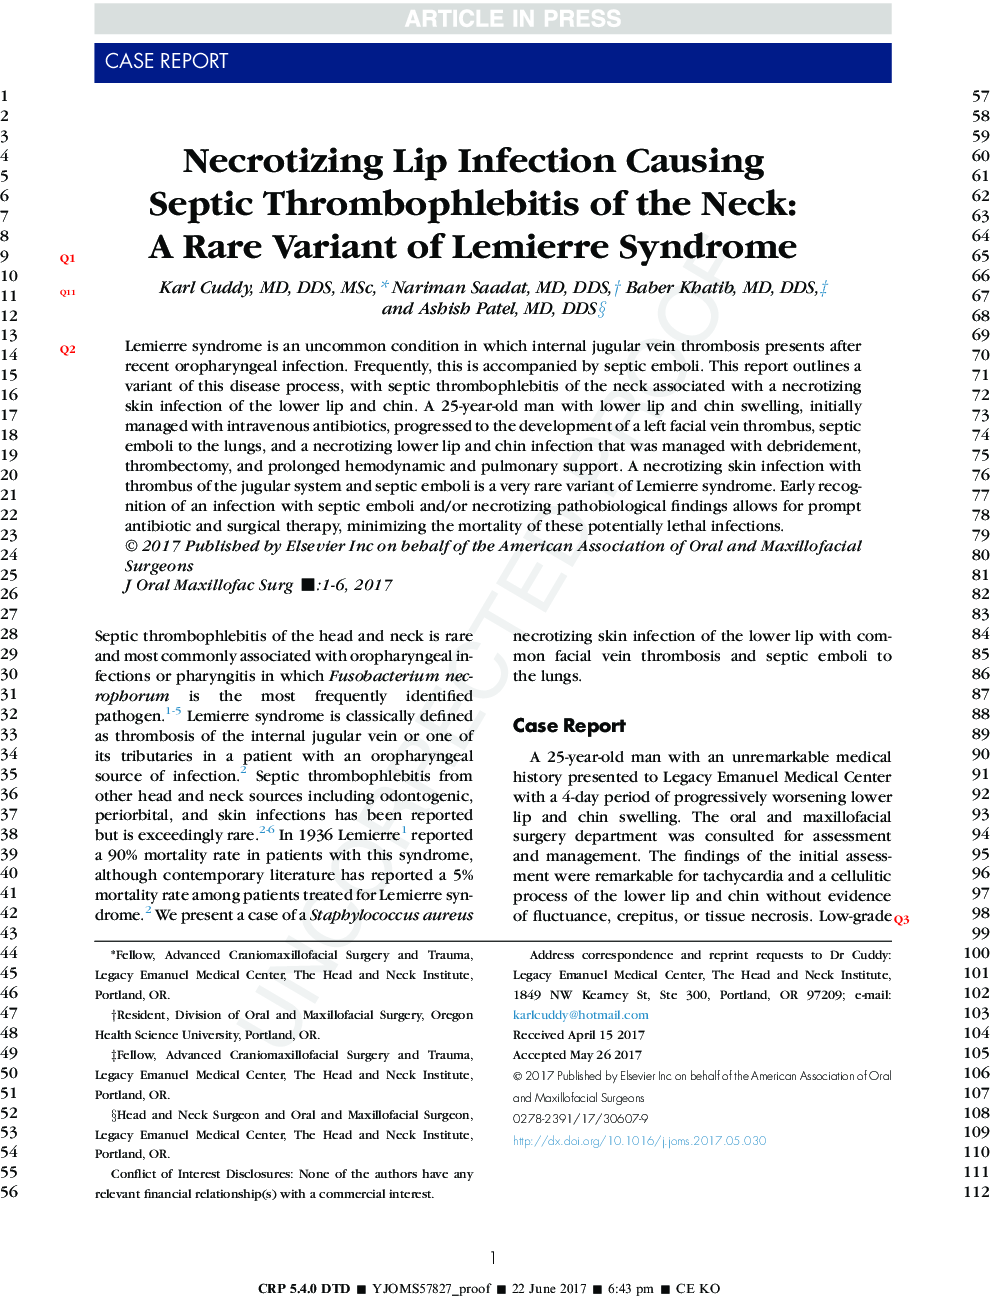 Necrotizing Lip Infection Causing Septic Thrombophlebitis of the Neck: AÂ Rare Variant of Lemierre Syndrome